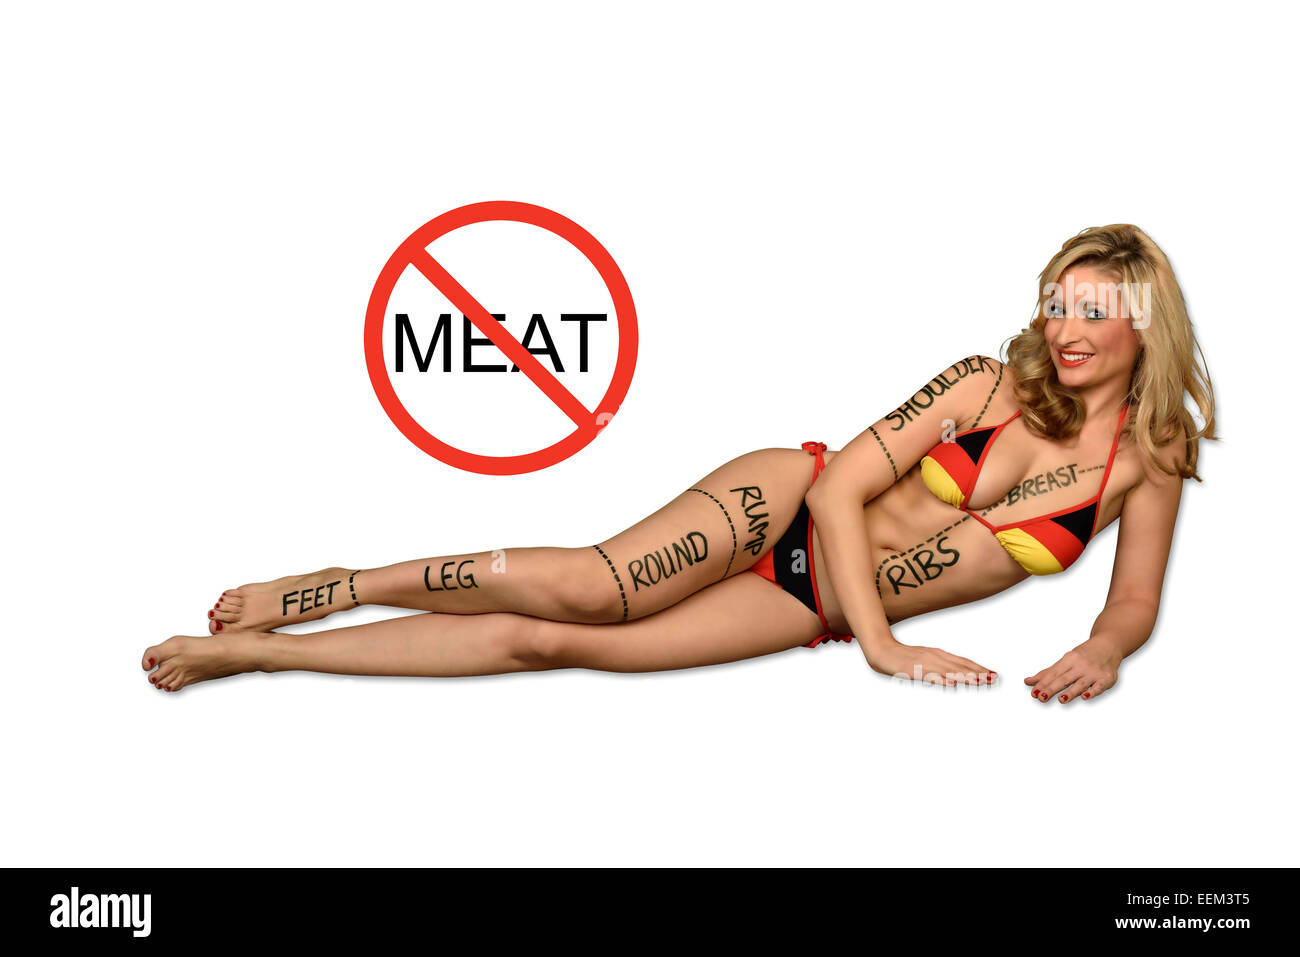 Symbolic image for vegetarianism or veganism, young woman wearing a bikini in the national colours of Germany, the names of the Stock Photo